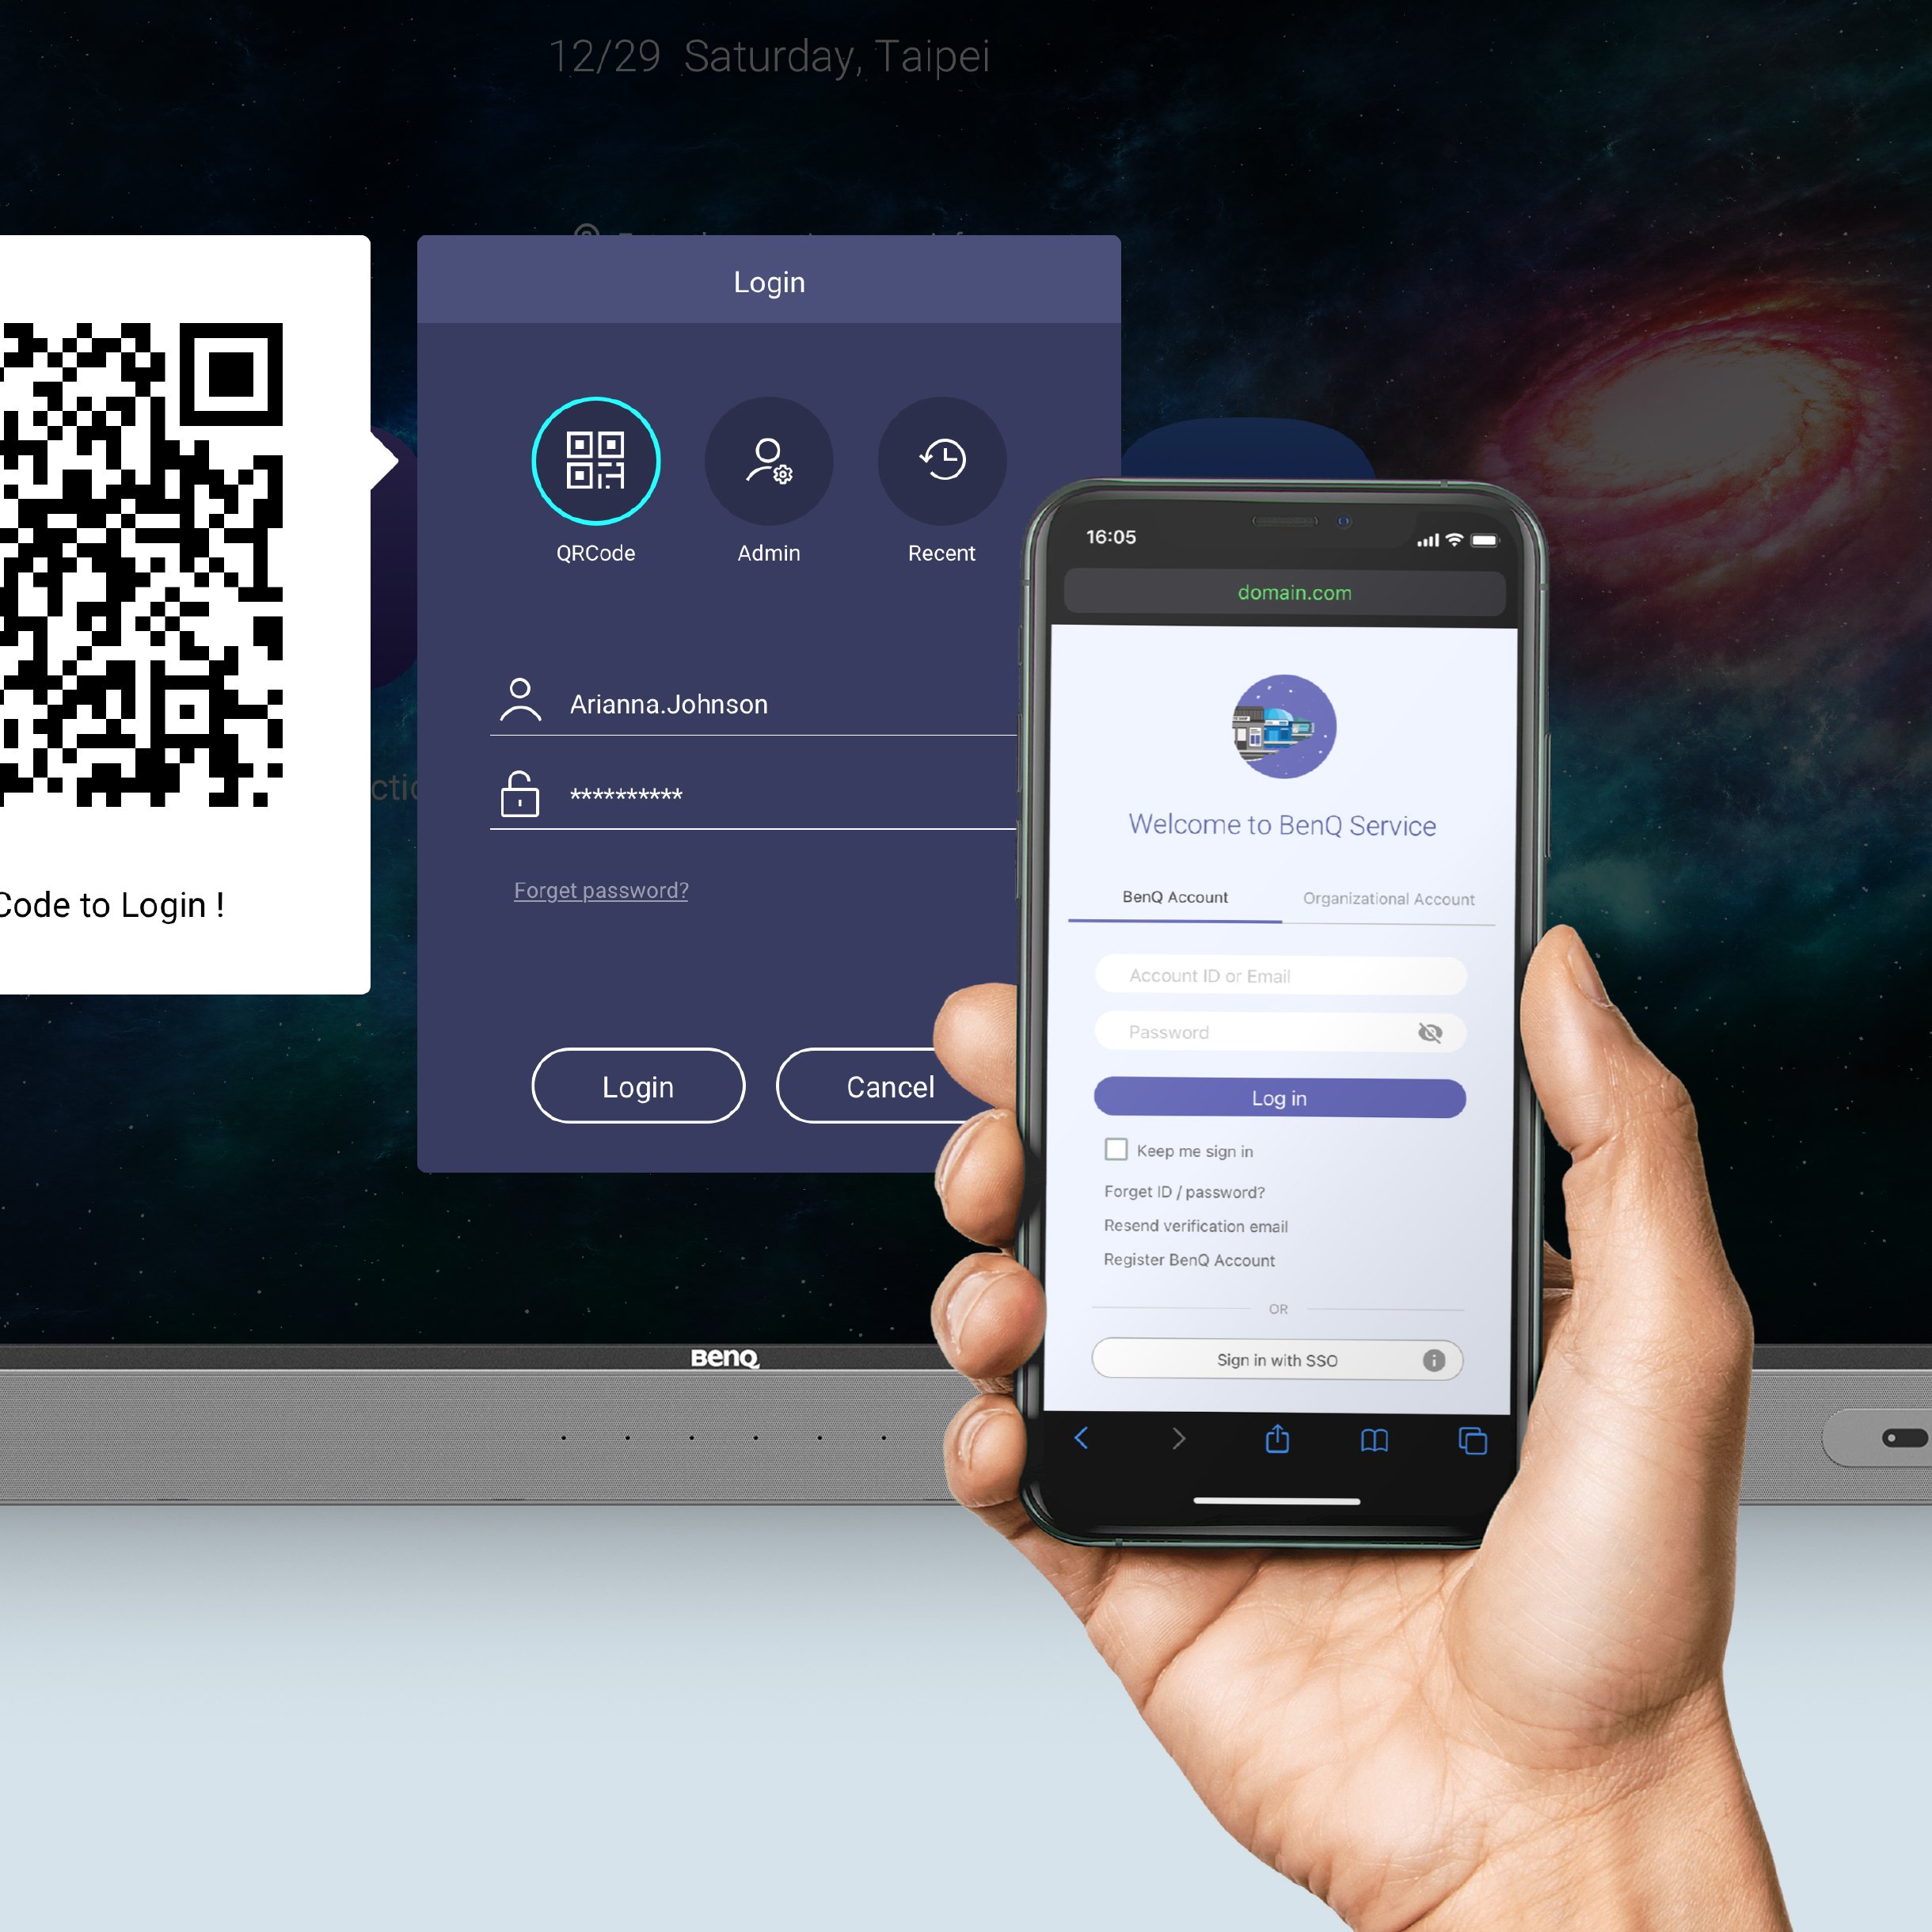 log into BenQ display by scanning a QR code